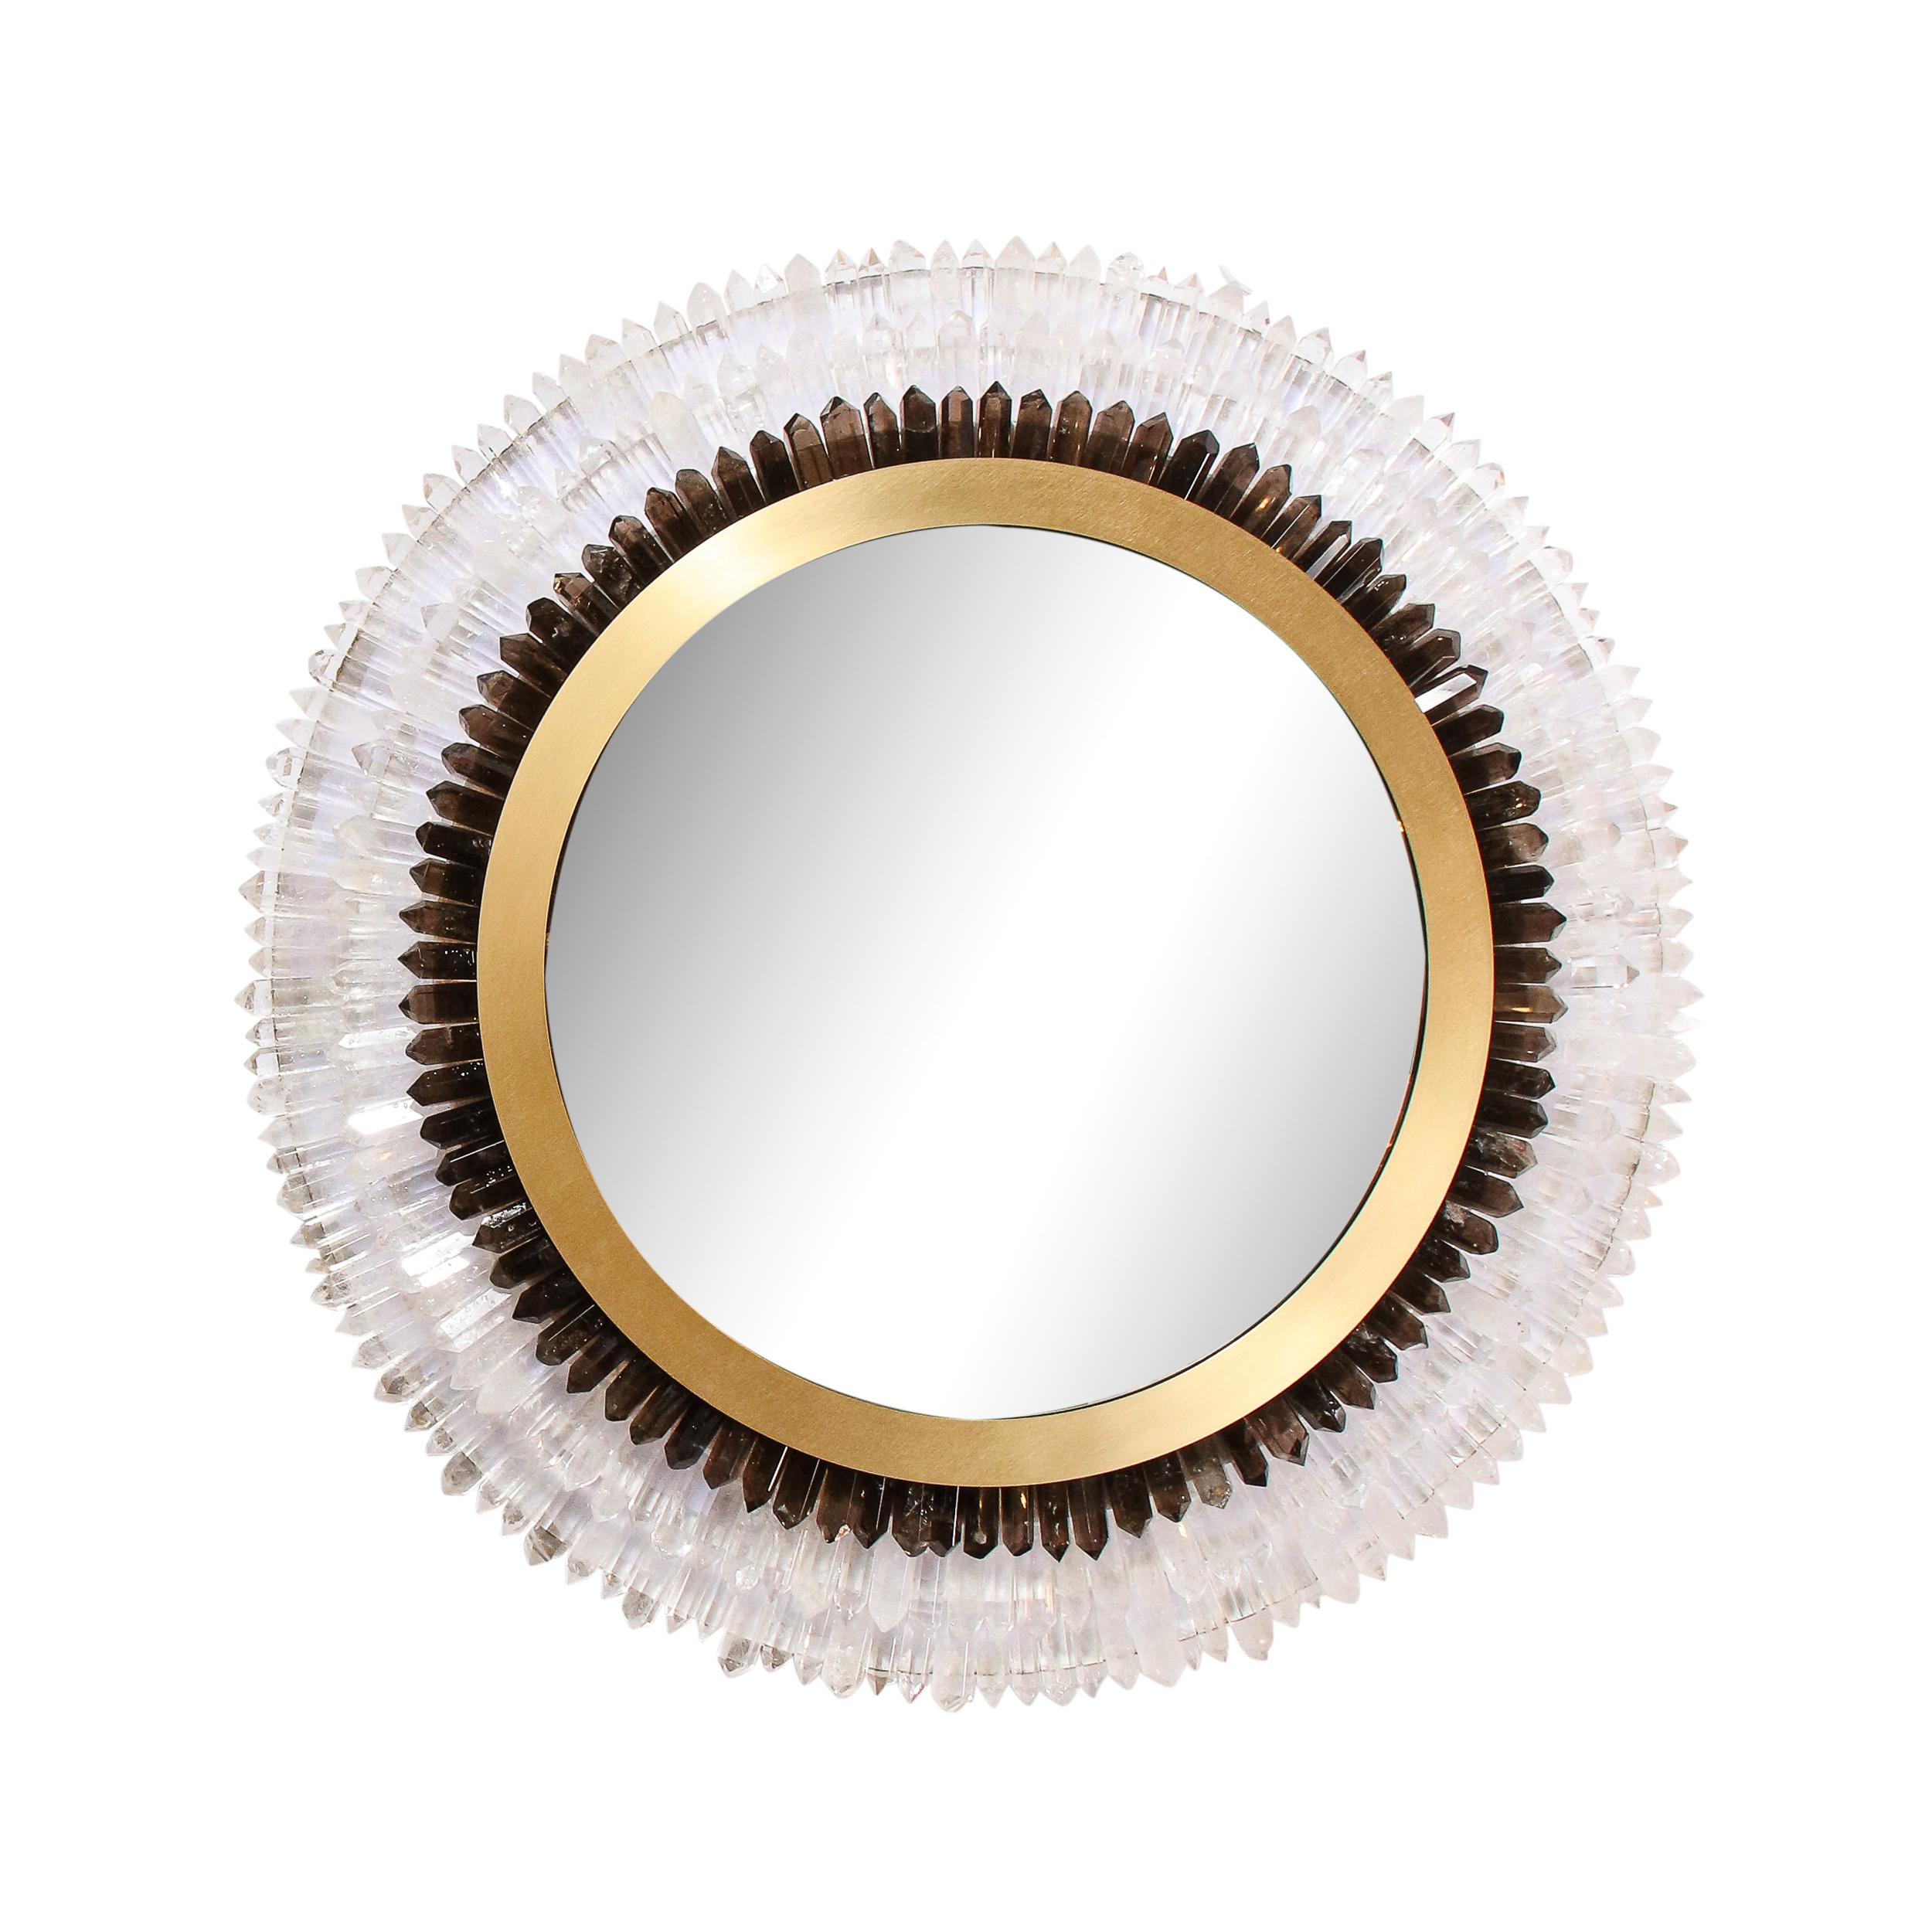 Using the finest materials available- including super fine rock crystal sourced from Brazil- this dramatic wall mirror was realized by artisans in New York state exclusively for High Style Deco. The piece offers a circular form with three tiers of